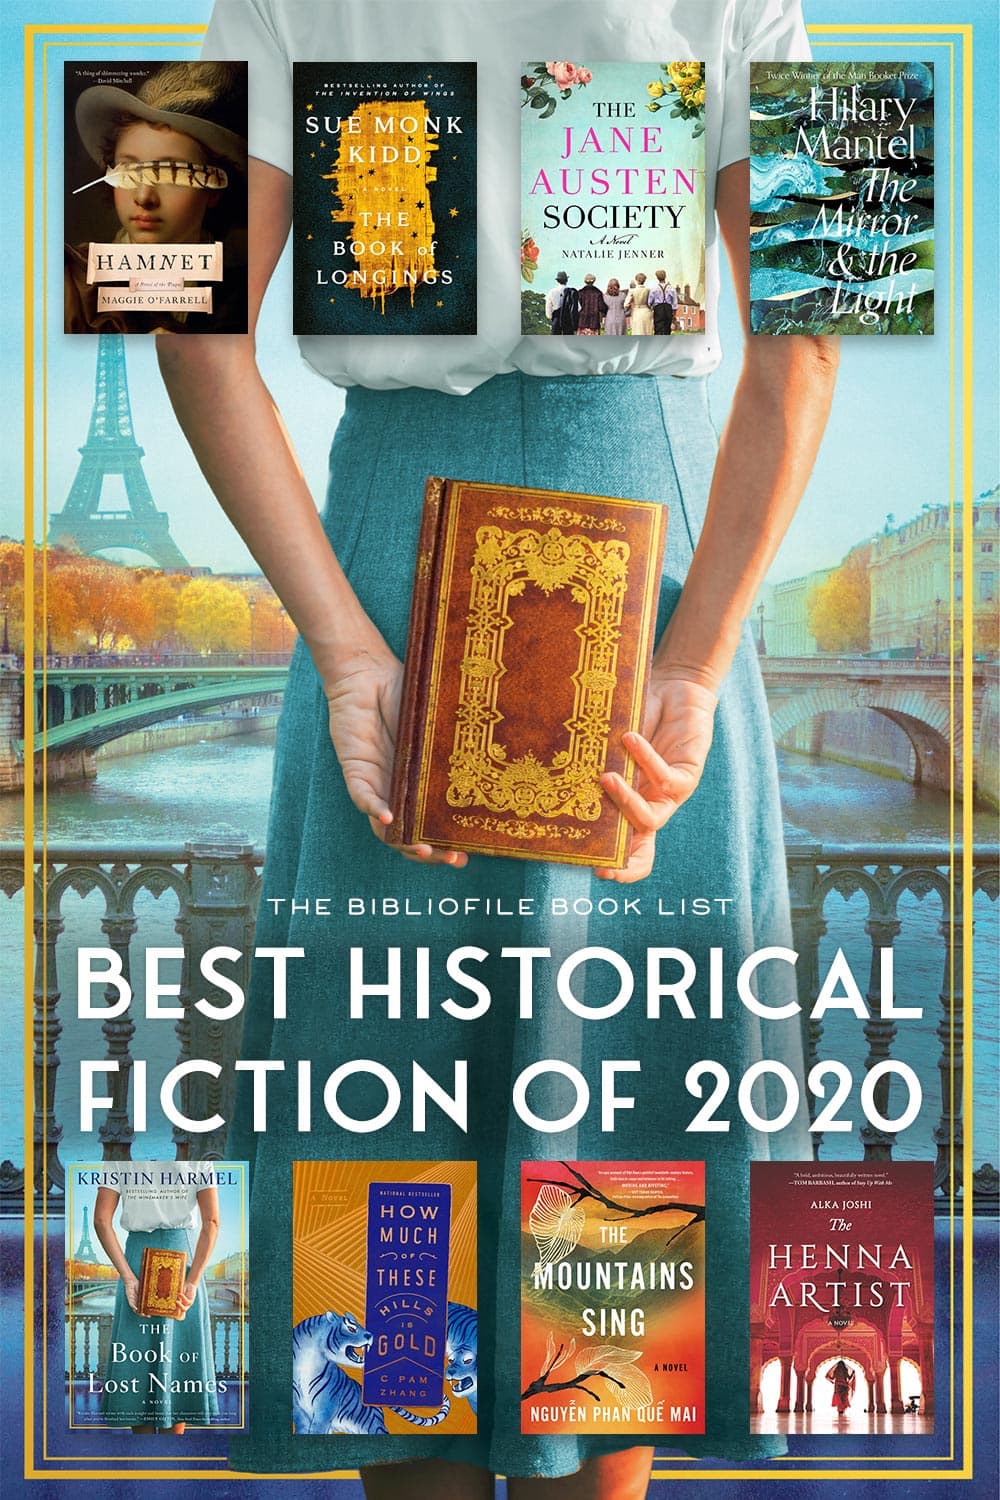 2020 Historical Fiction Books / Best New Releases in Historical Fiction